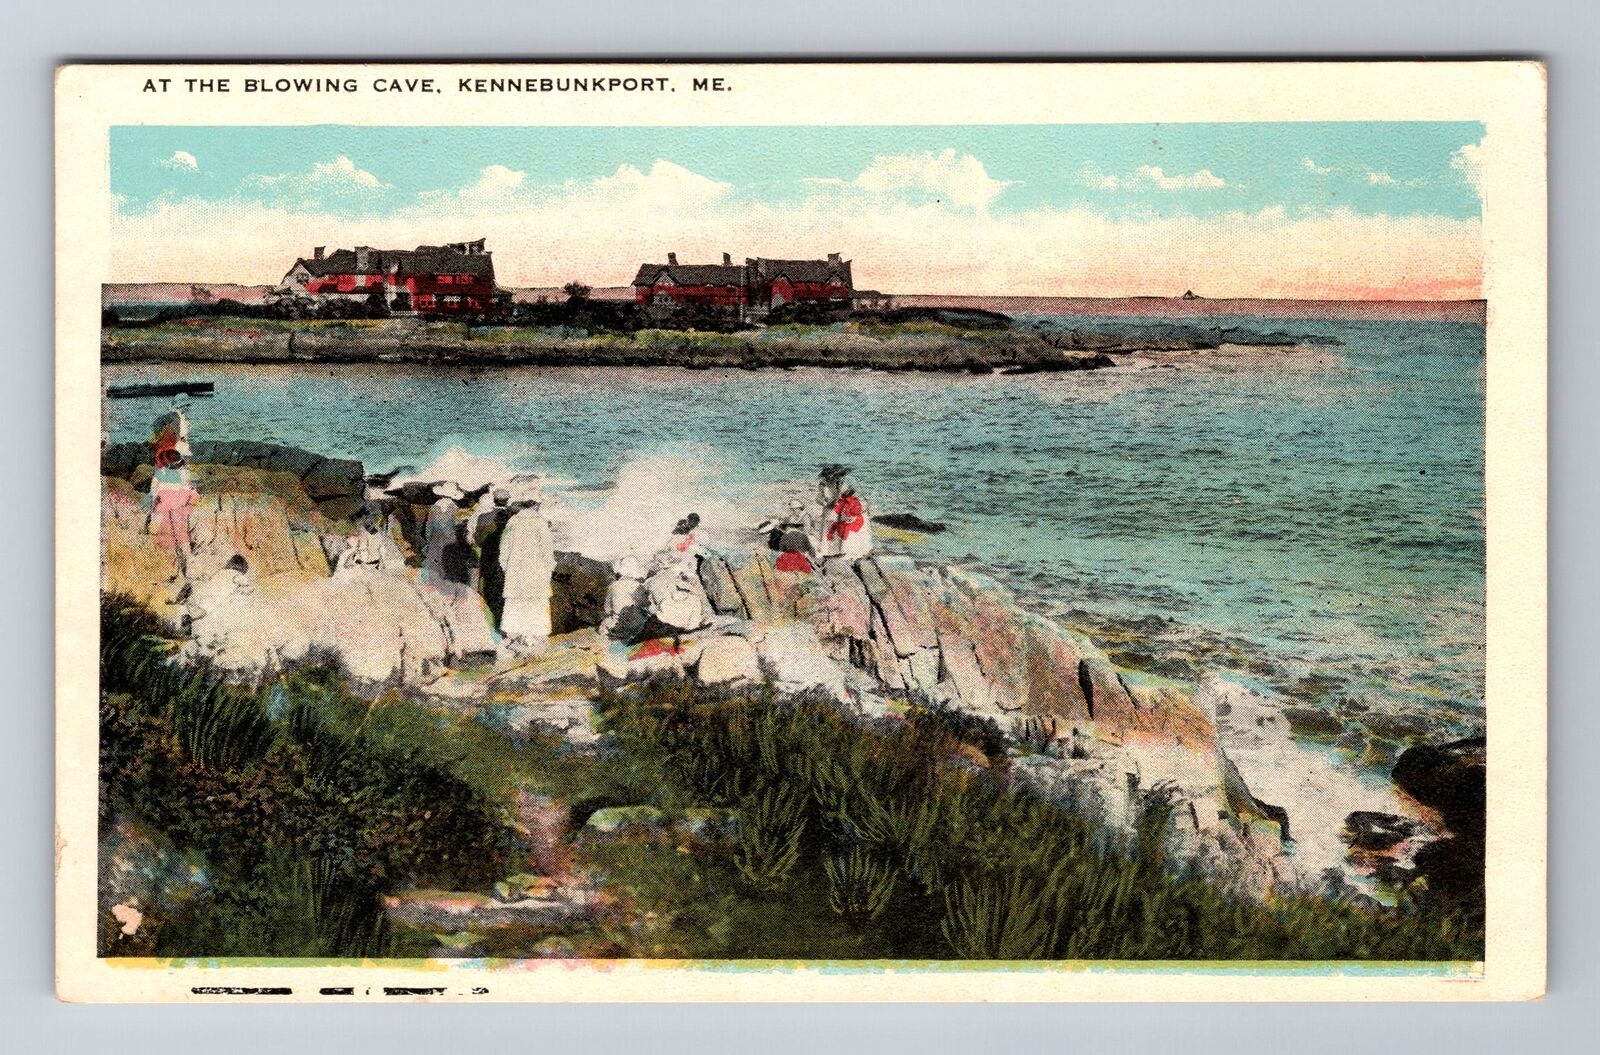 Kennebunkport ME-Maine, The Blowing Cave, Waterfront Mansions, Vintage Postcard